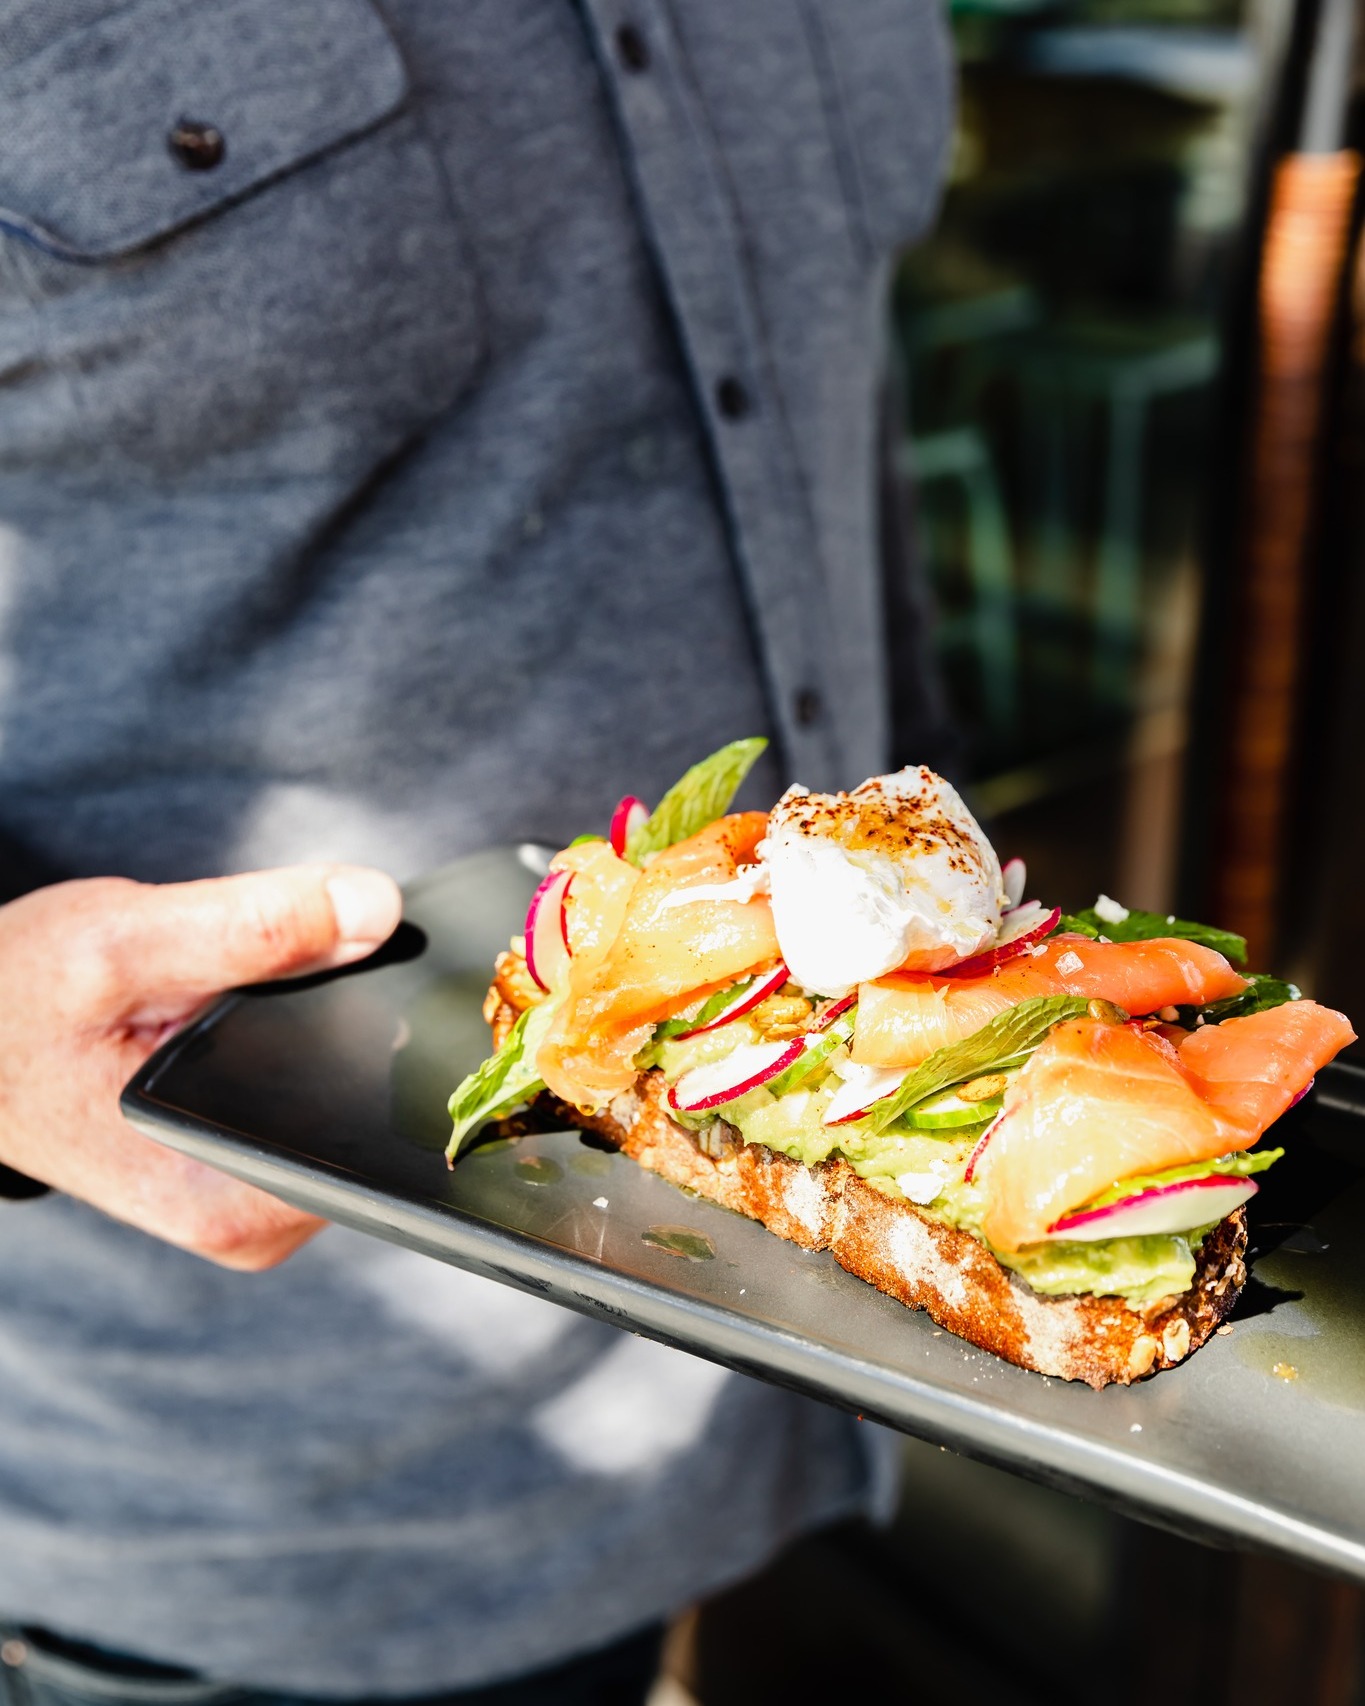 Hand holding a plate of avocado toast with smoked salmon